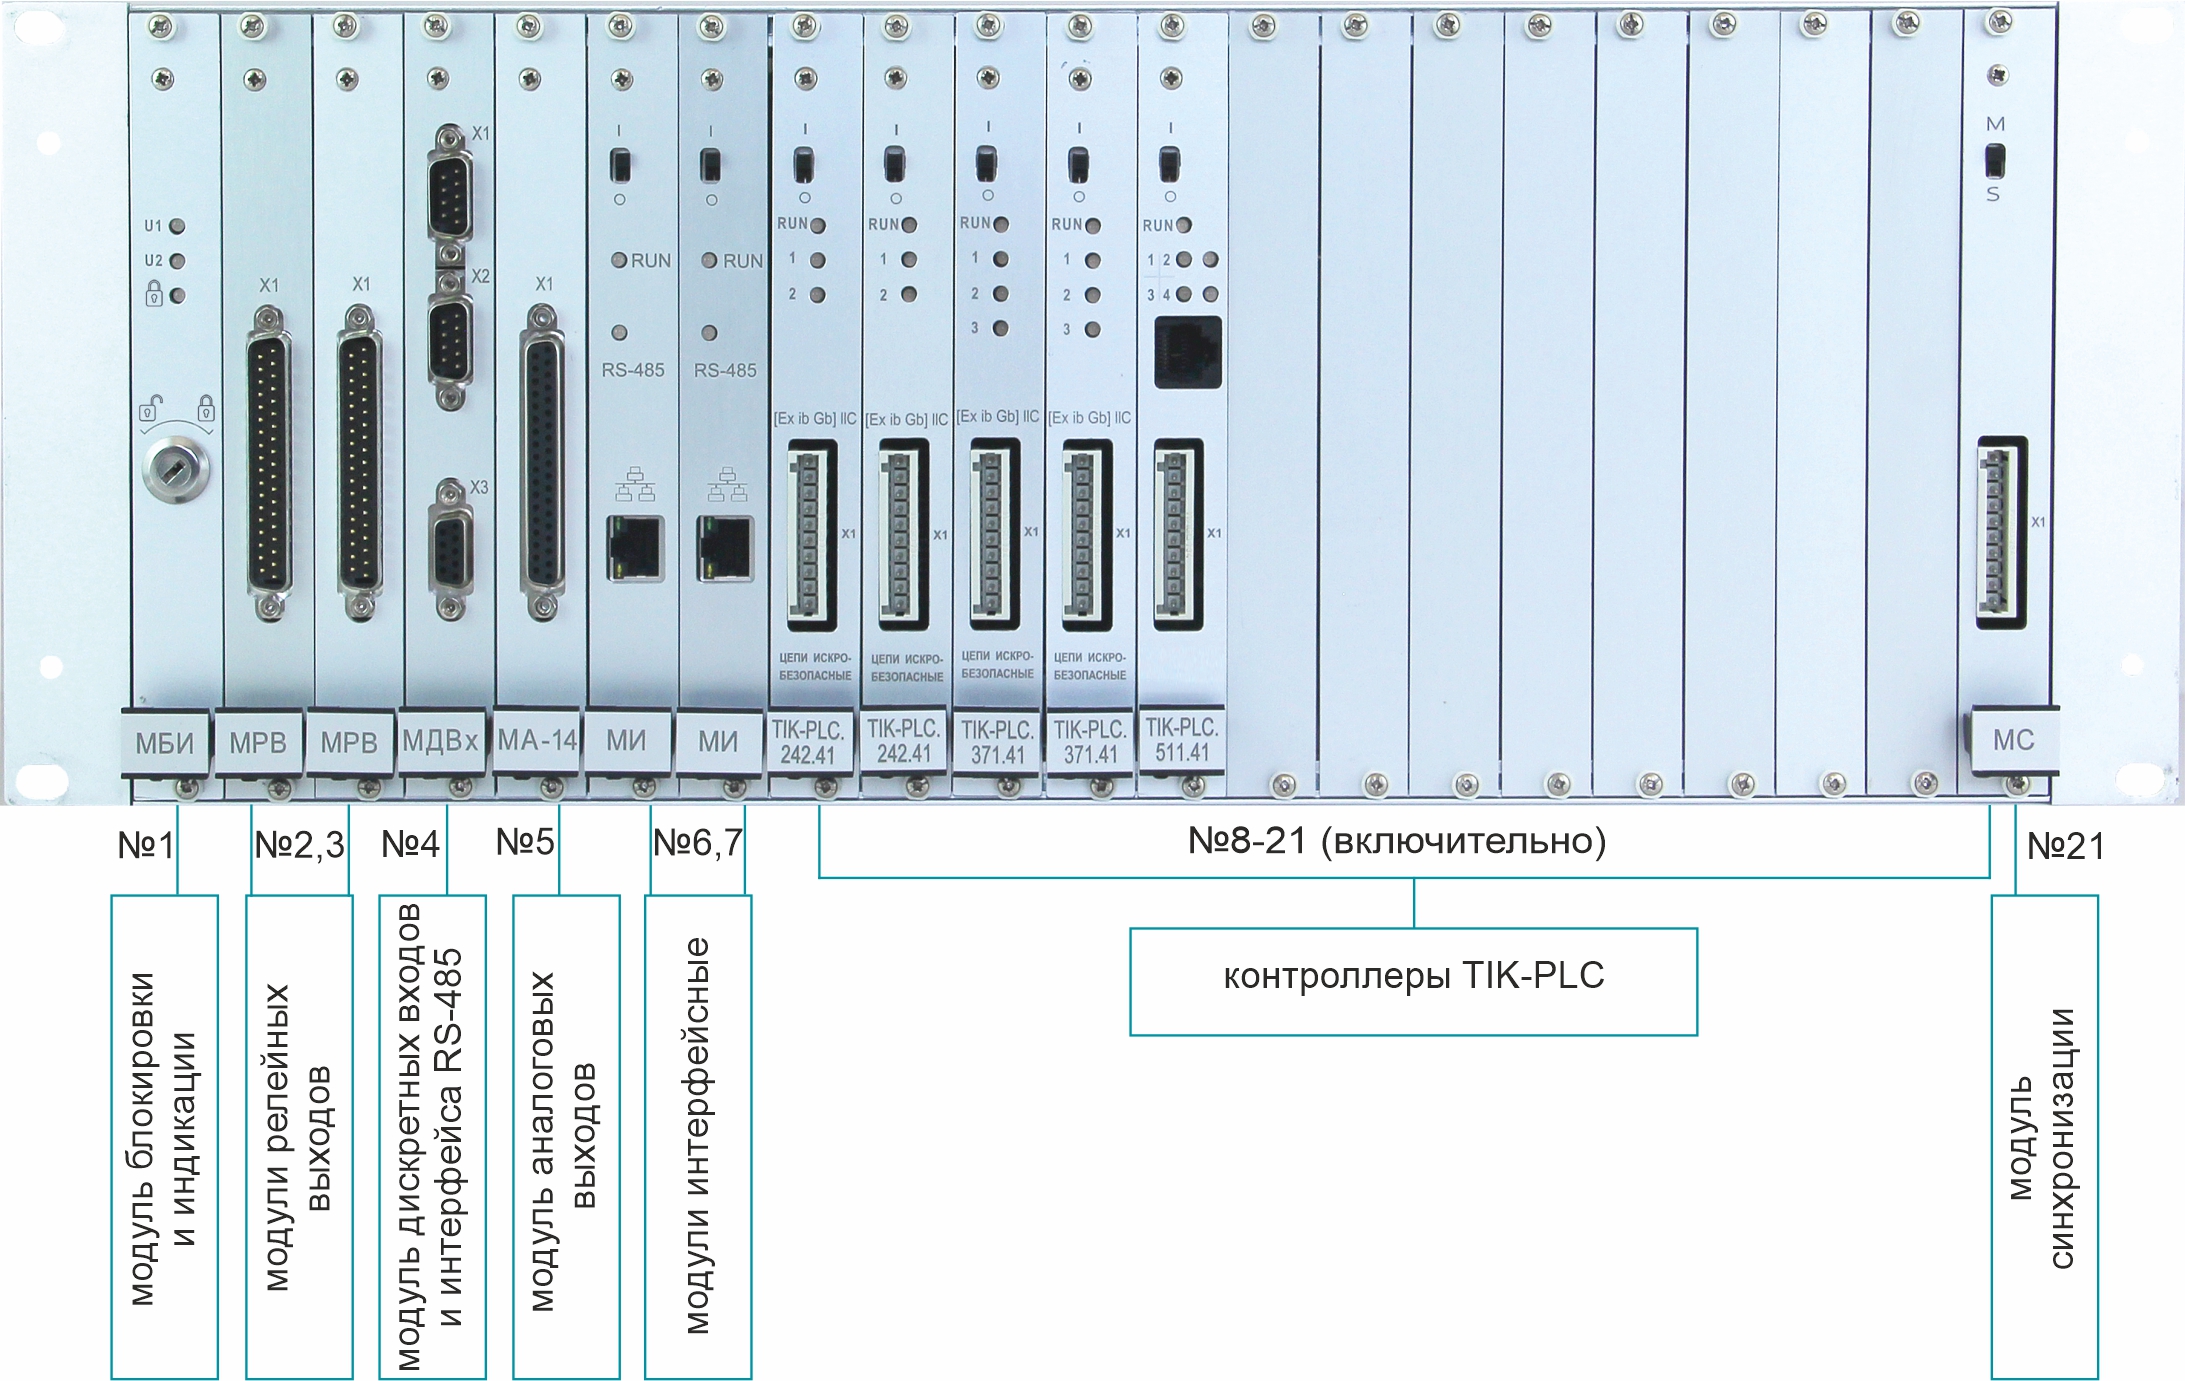 Composition of the crate of TIK-RVM extended vibration monitoring system based on TIK-PLC 241 ver.02 controller